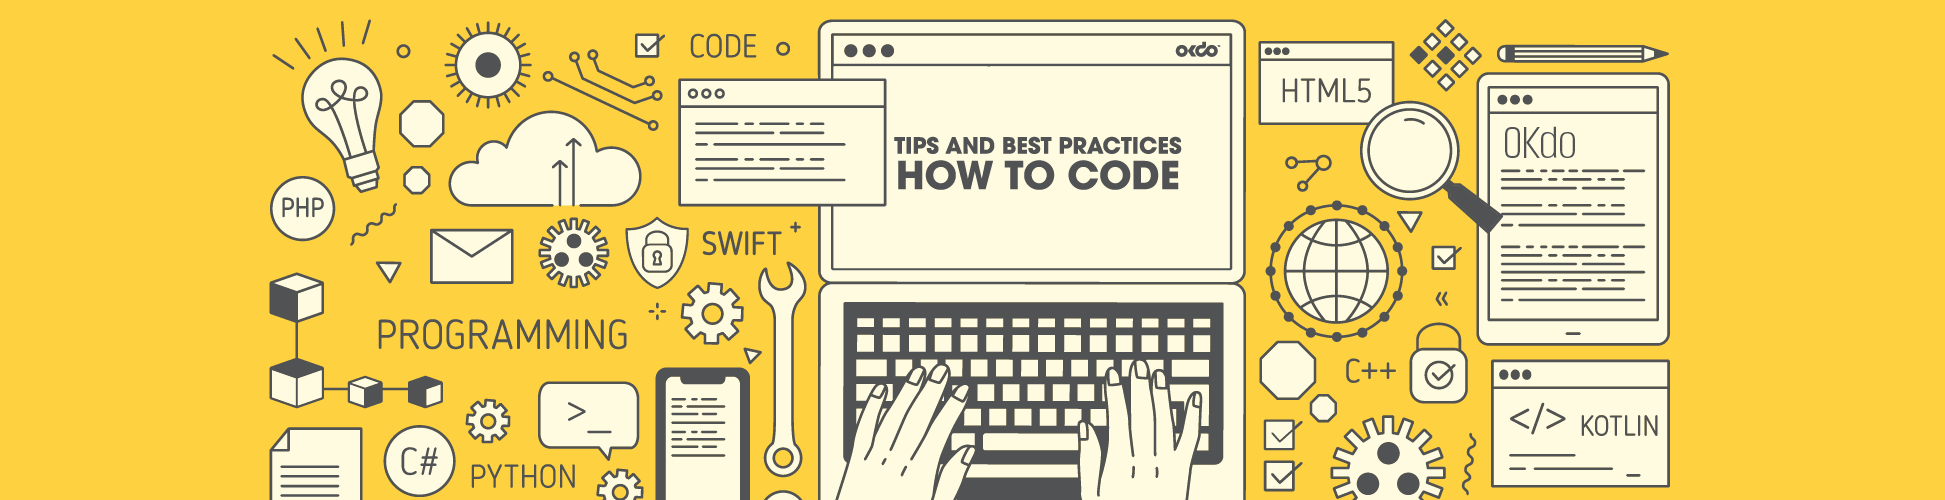 Learn to code: Coding best practices and tips